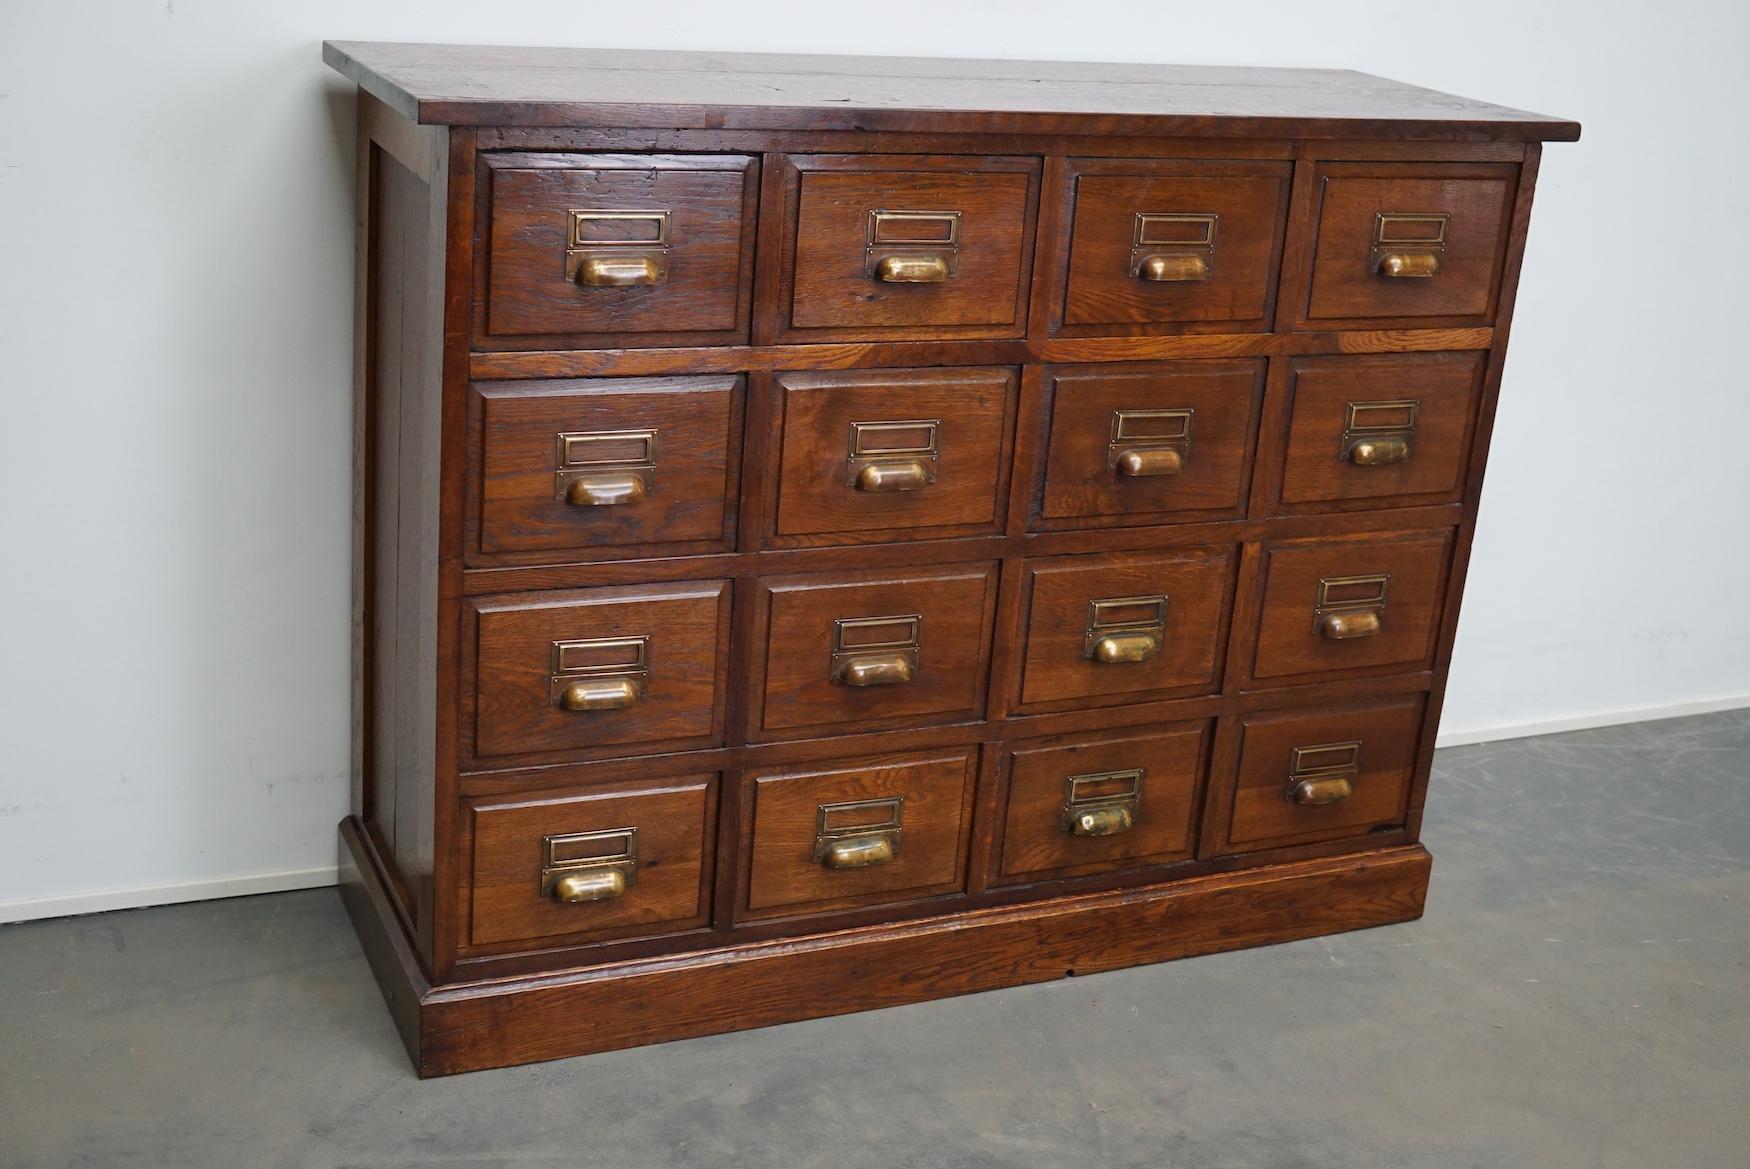 This apothecary / filing cabinet was produced during the 1930s in France. This piece features 16 drawers from oak with brass pulls. The interior dimensions of the drawers are: D x W x H 32 x 23 x 18 cm.